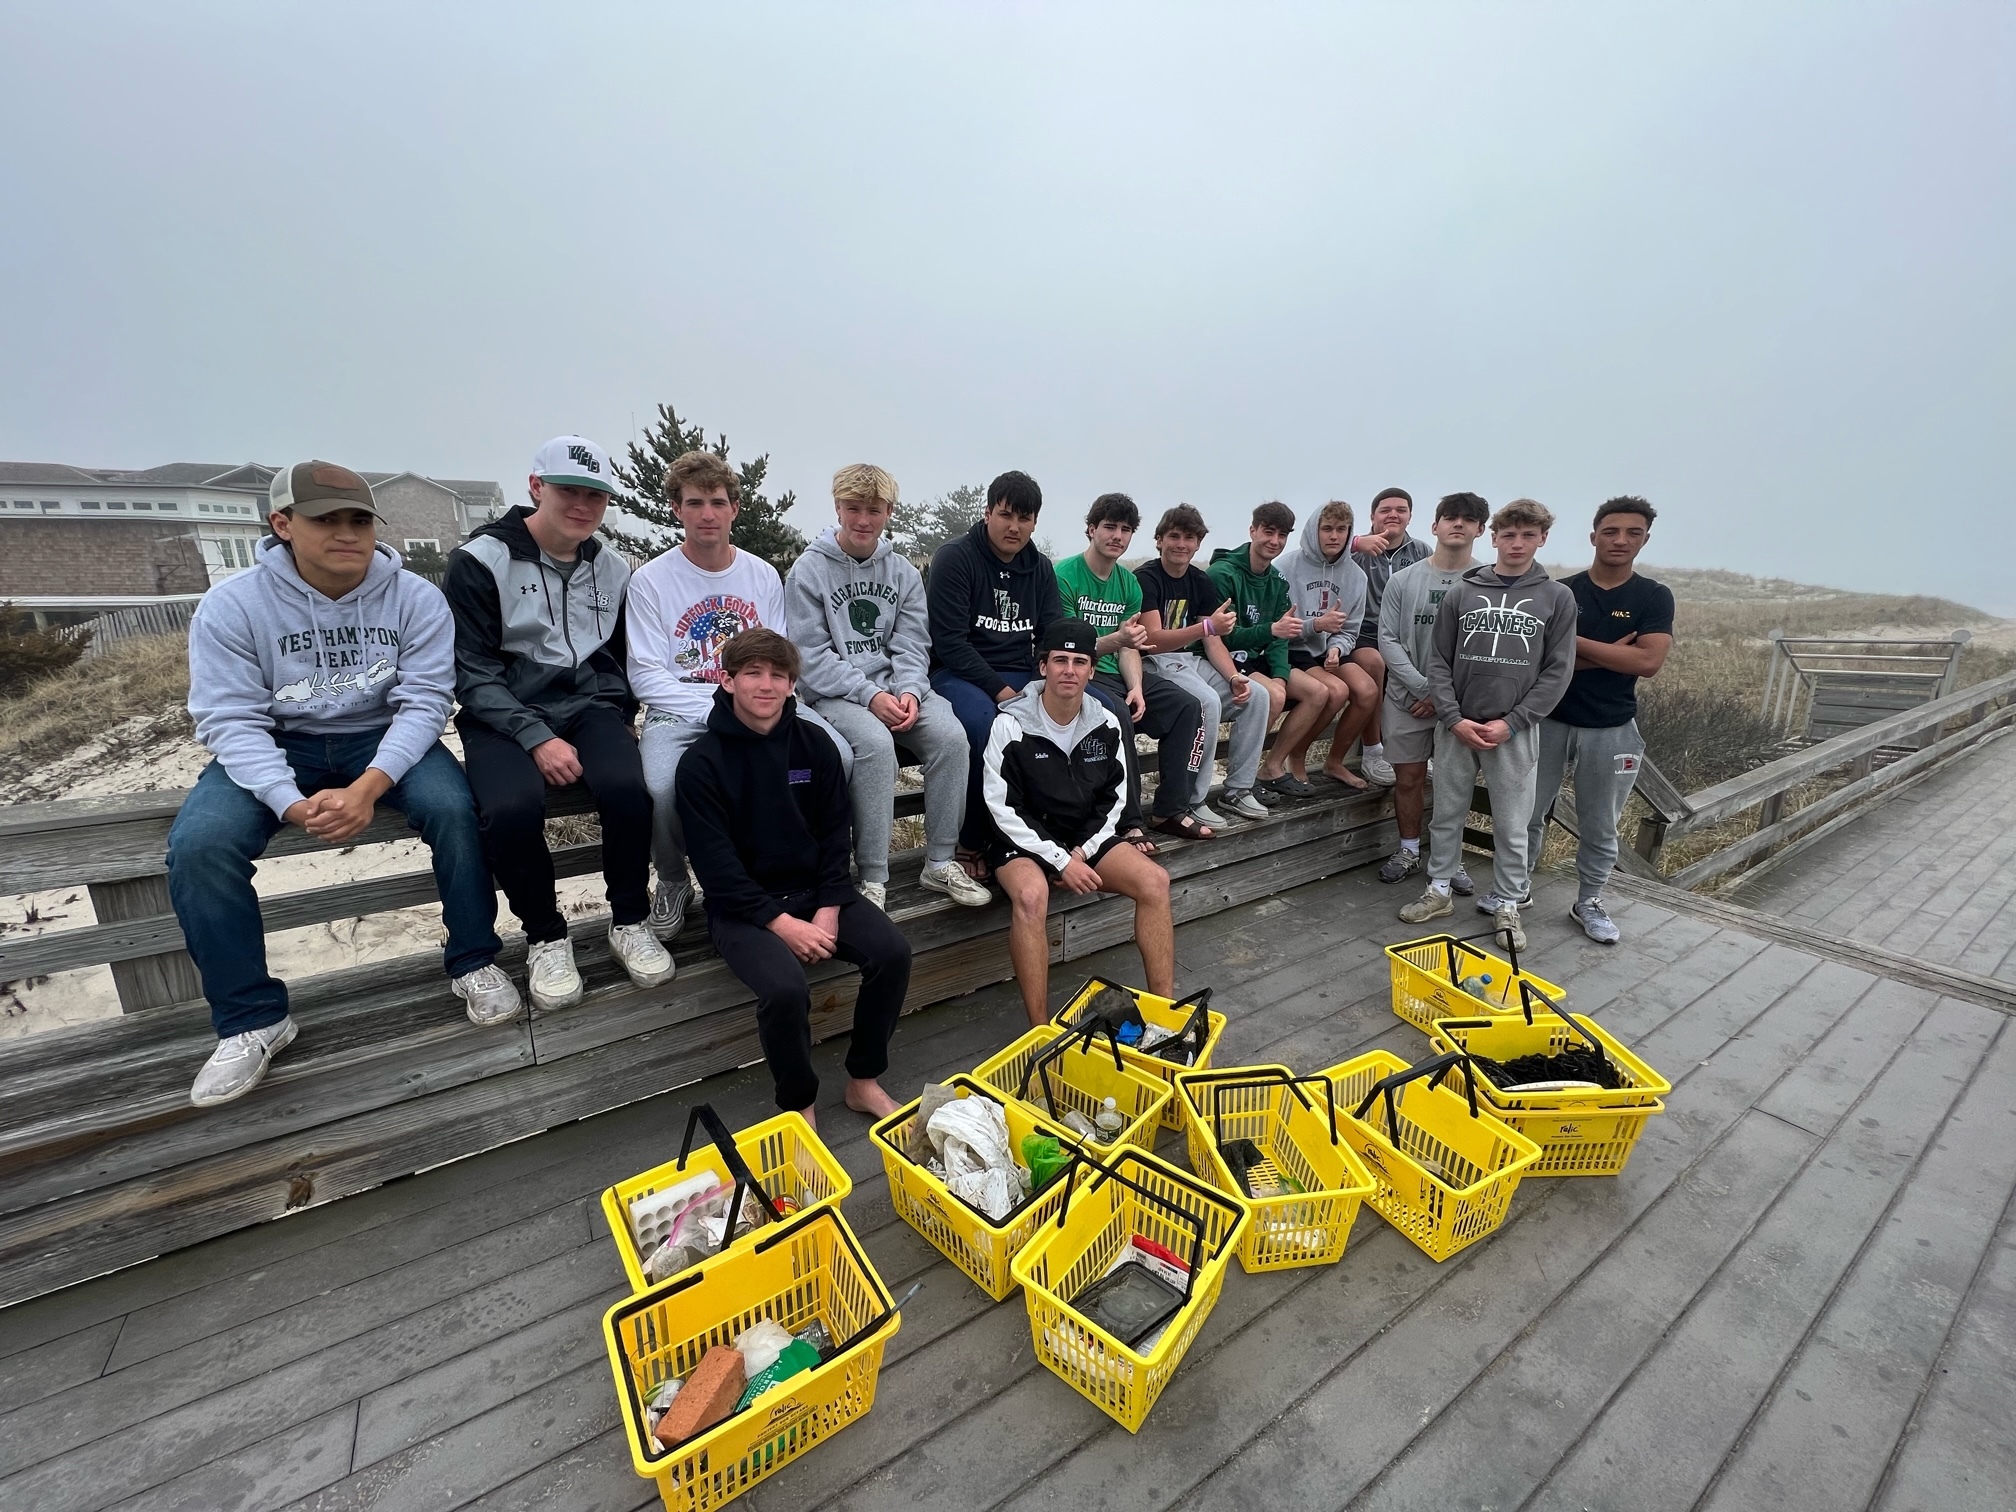 Members of the Westhampton Beach High School varsity football team recently volunteered their time to assist the Moriches Bay Project with a beach cleanup from Cupsogue Beach to Jetty 4. The students collected a total of 1,500 pounds of trash in three hours. COURTESY WESTHAMPTON BEACH SCHOOL DISTRICT